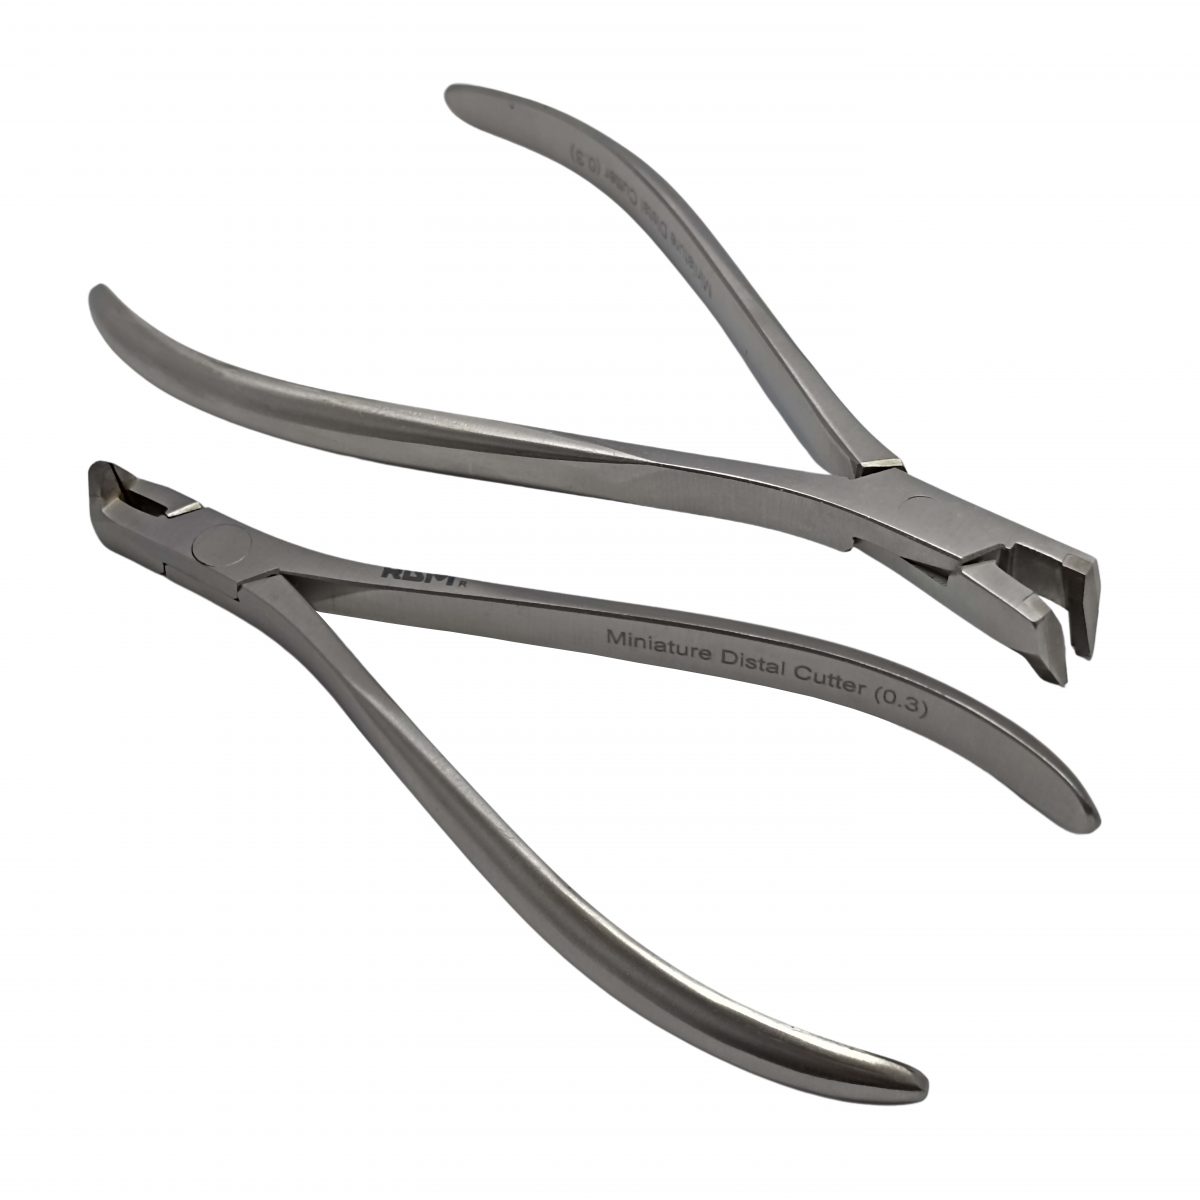 Miniature Distal End Cutter With Safety Hold